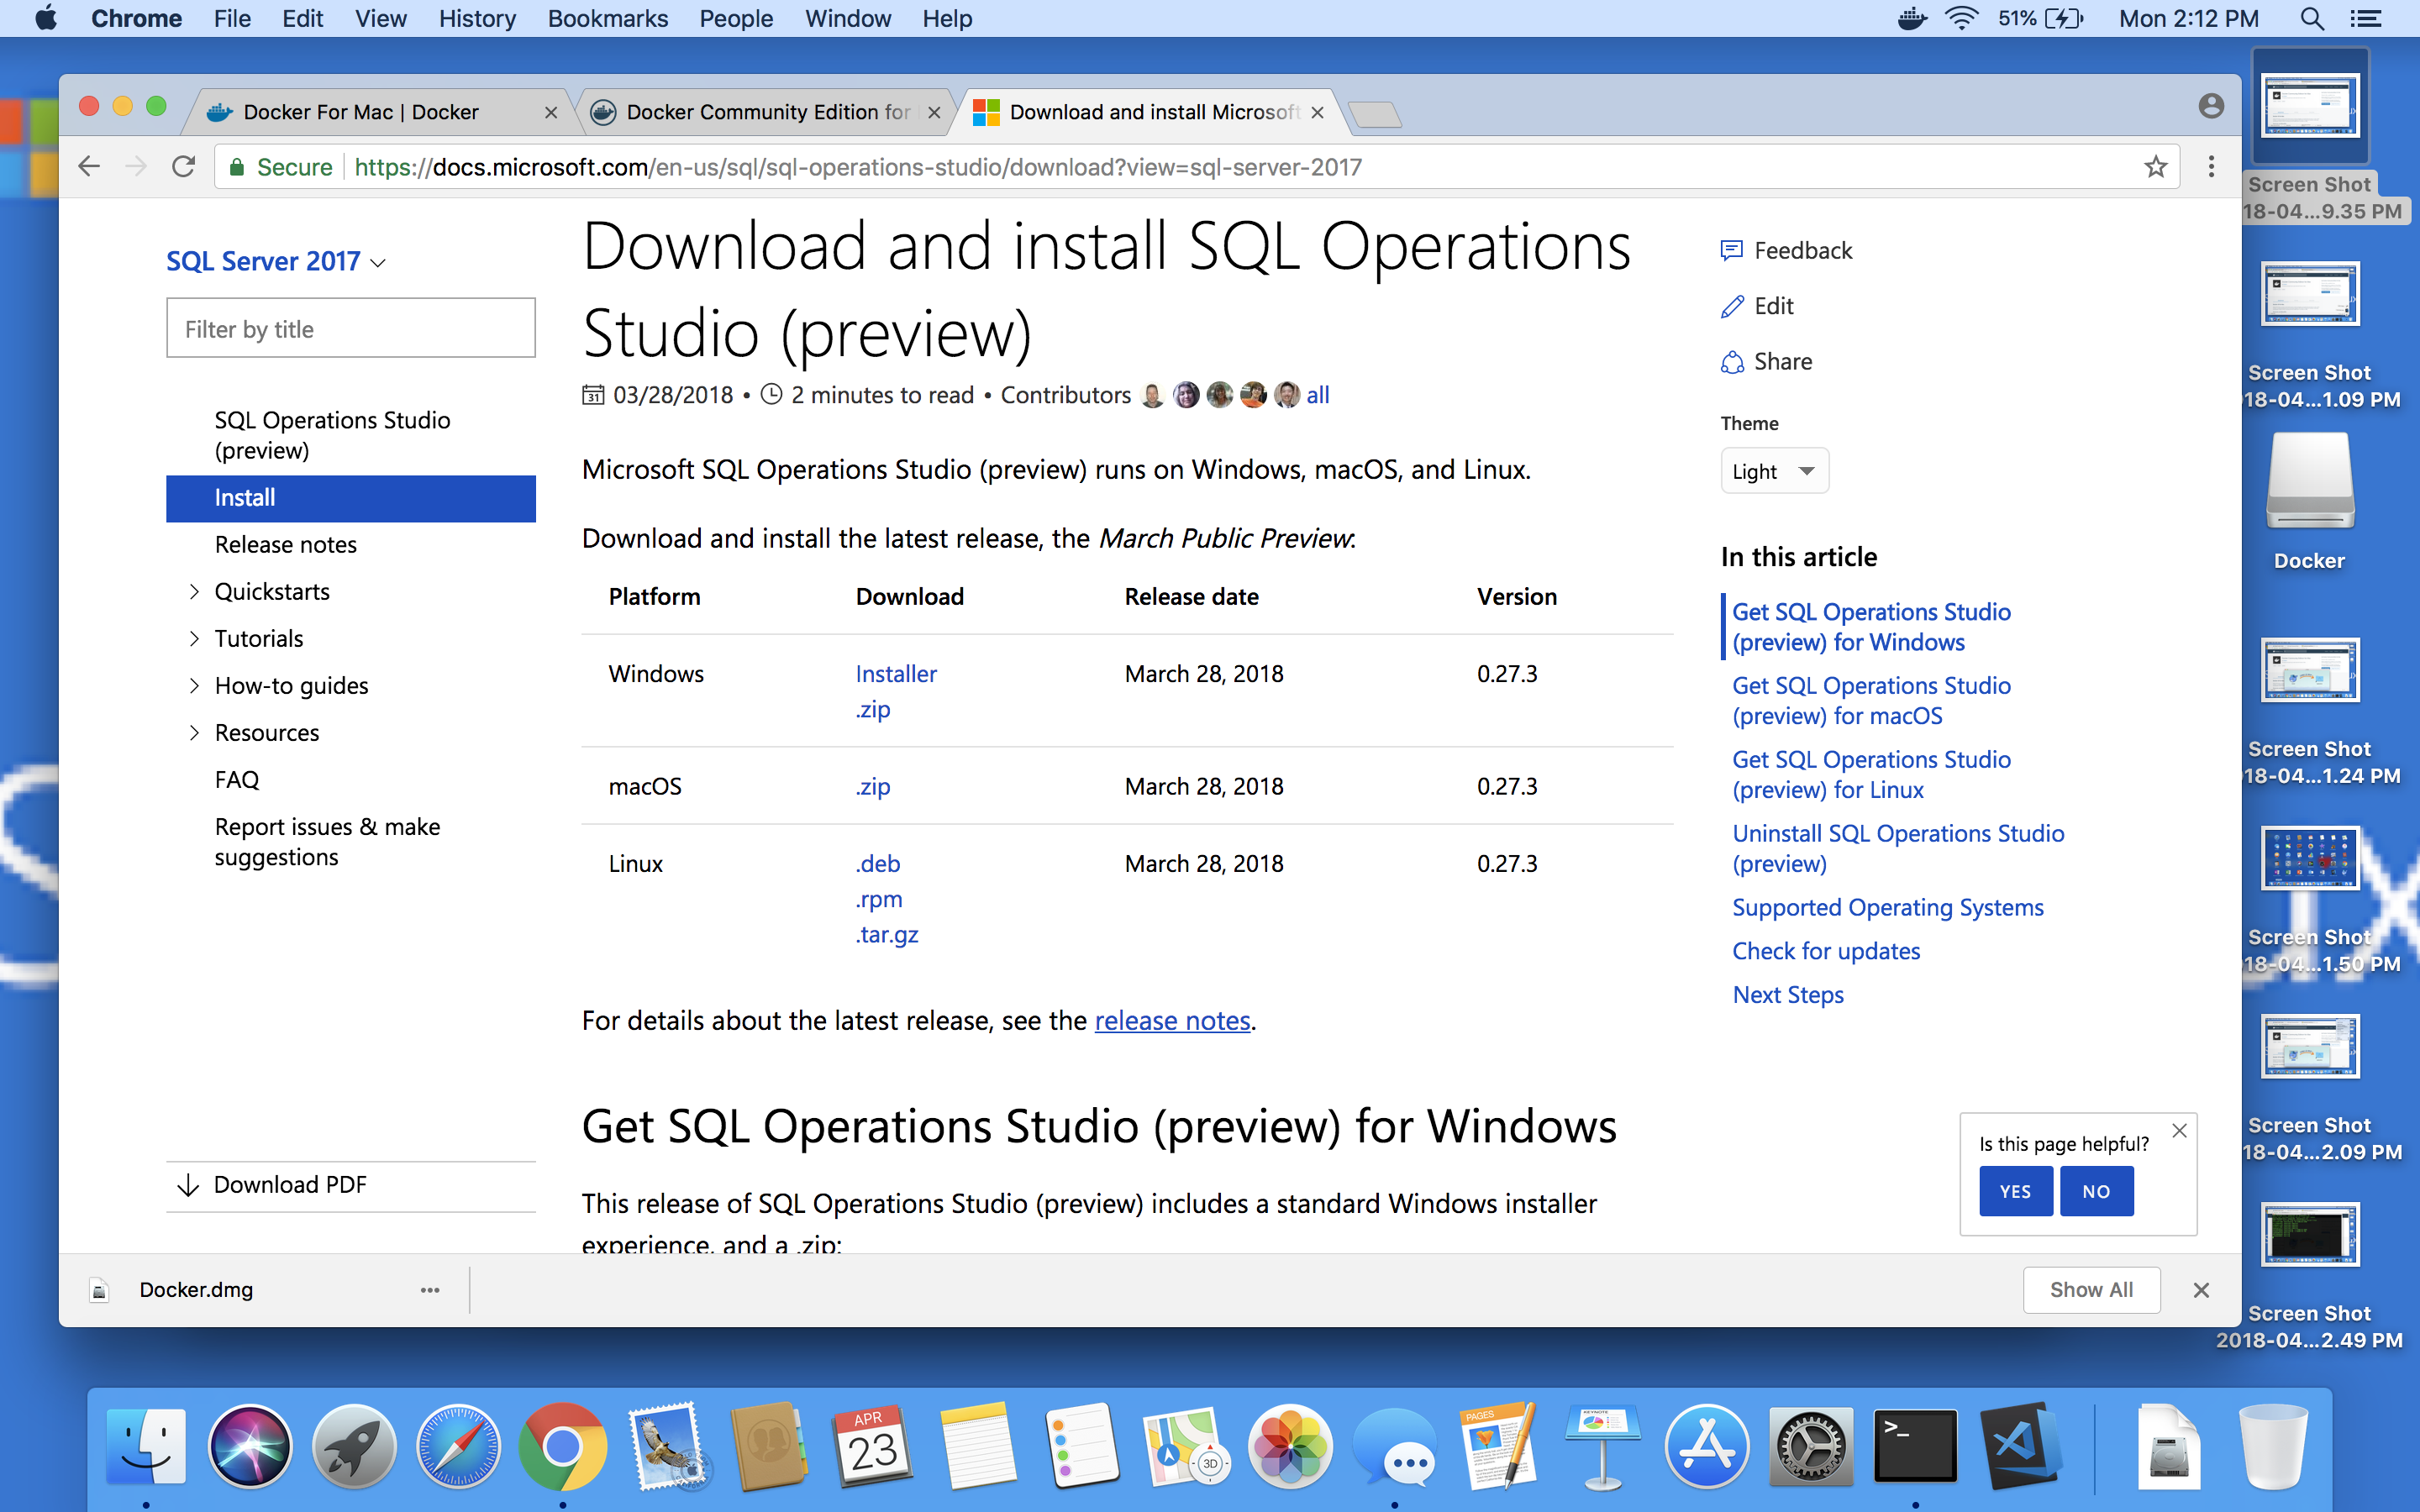 How To Download Sql Server 2017 On Mac